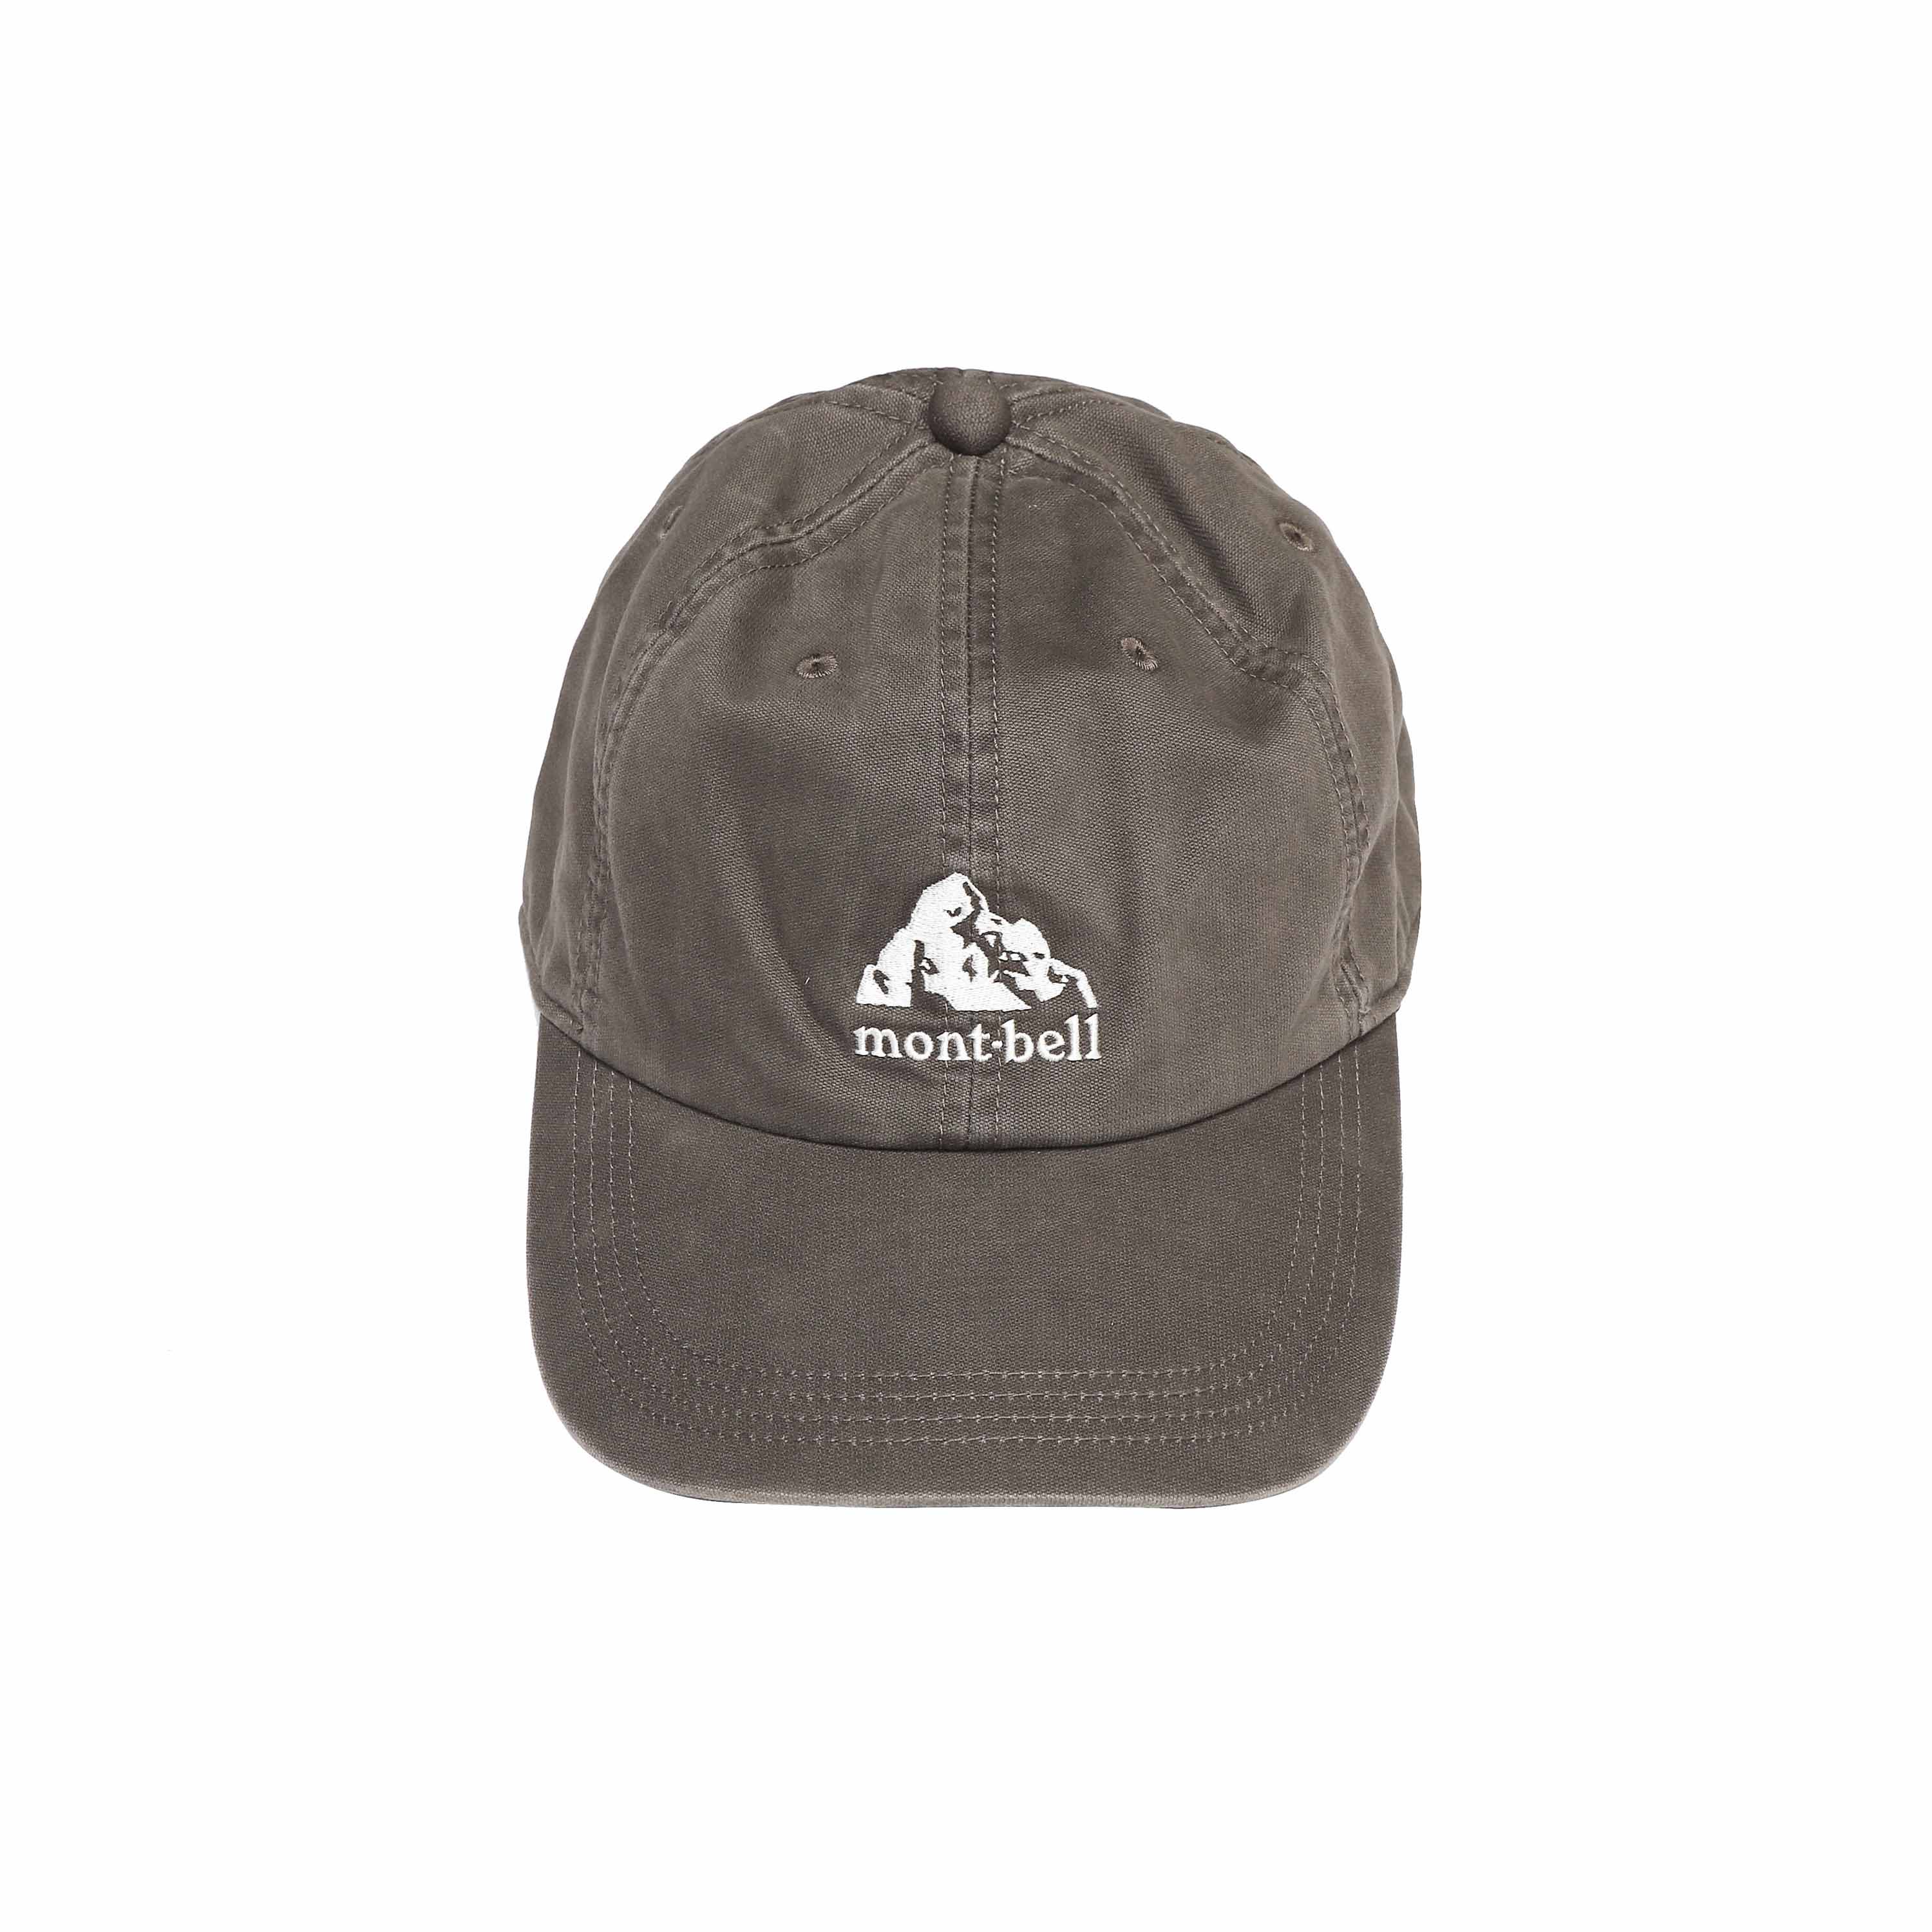 WASHED OUT COTTON CAP - BROWN